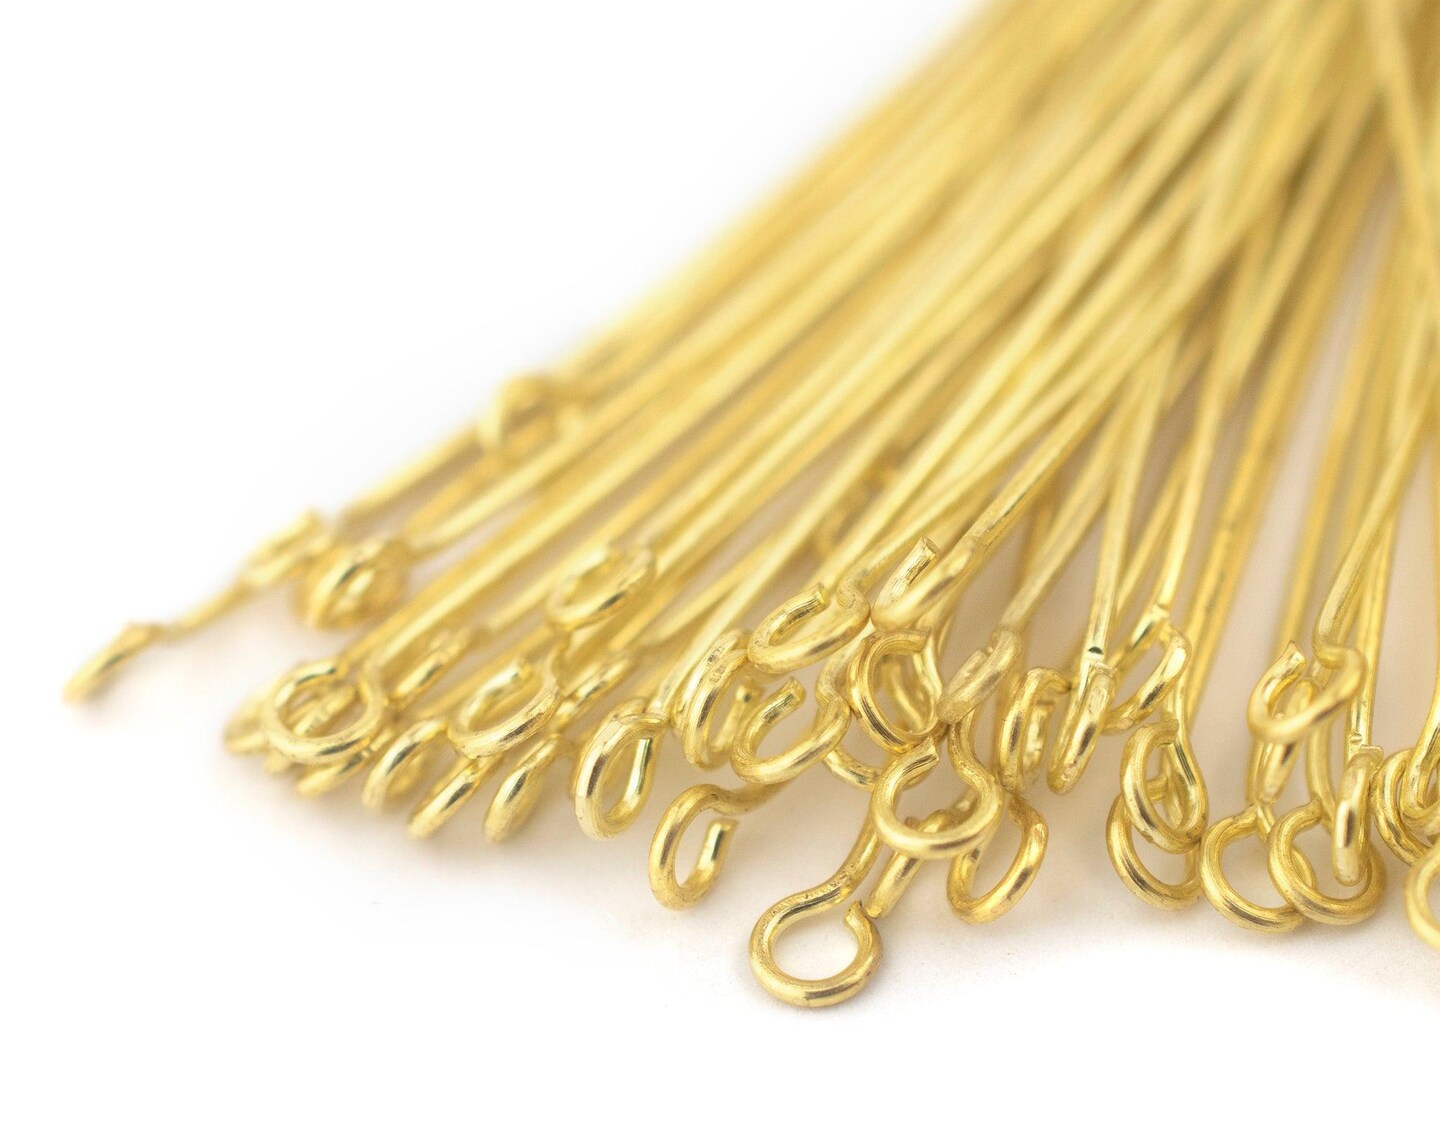 TheBeadChest Gold 21 Gauge 3 Inch Eye Pins (Approx 100 pieces)